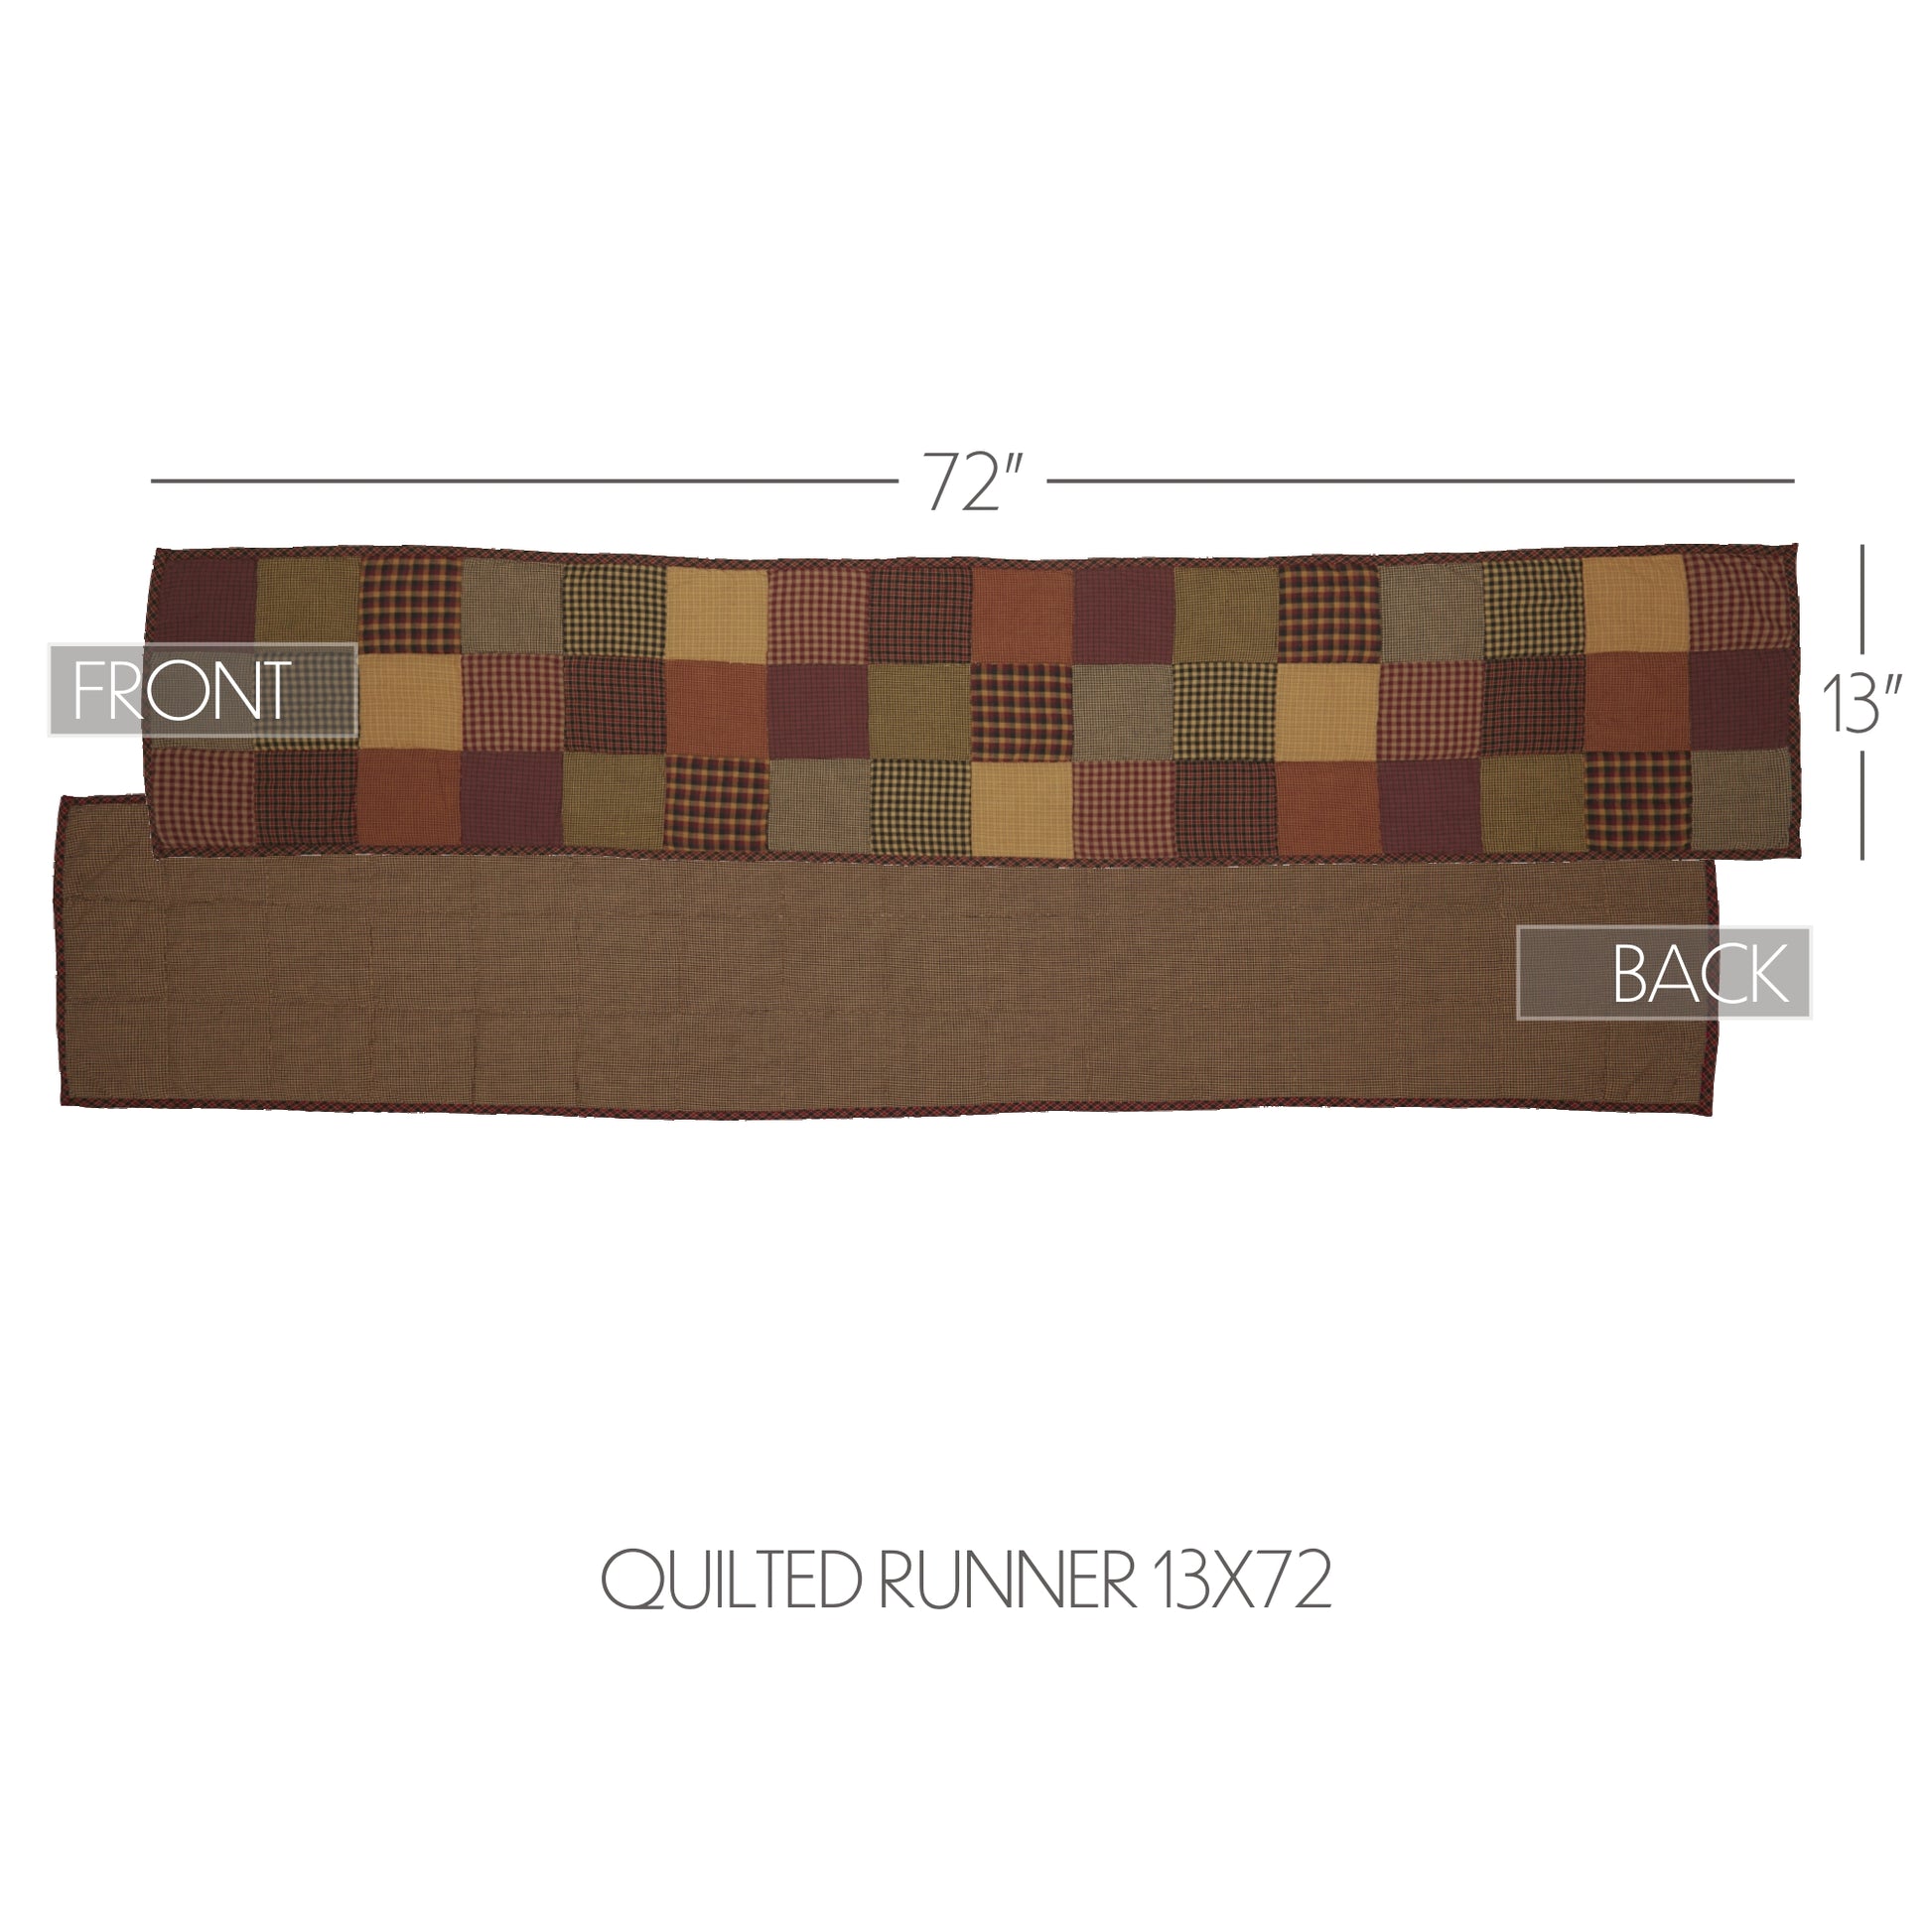 56702-Heritage-Farms-Quilted-Runner-13x72-image-1